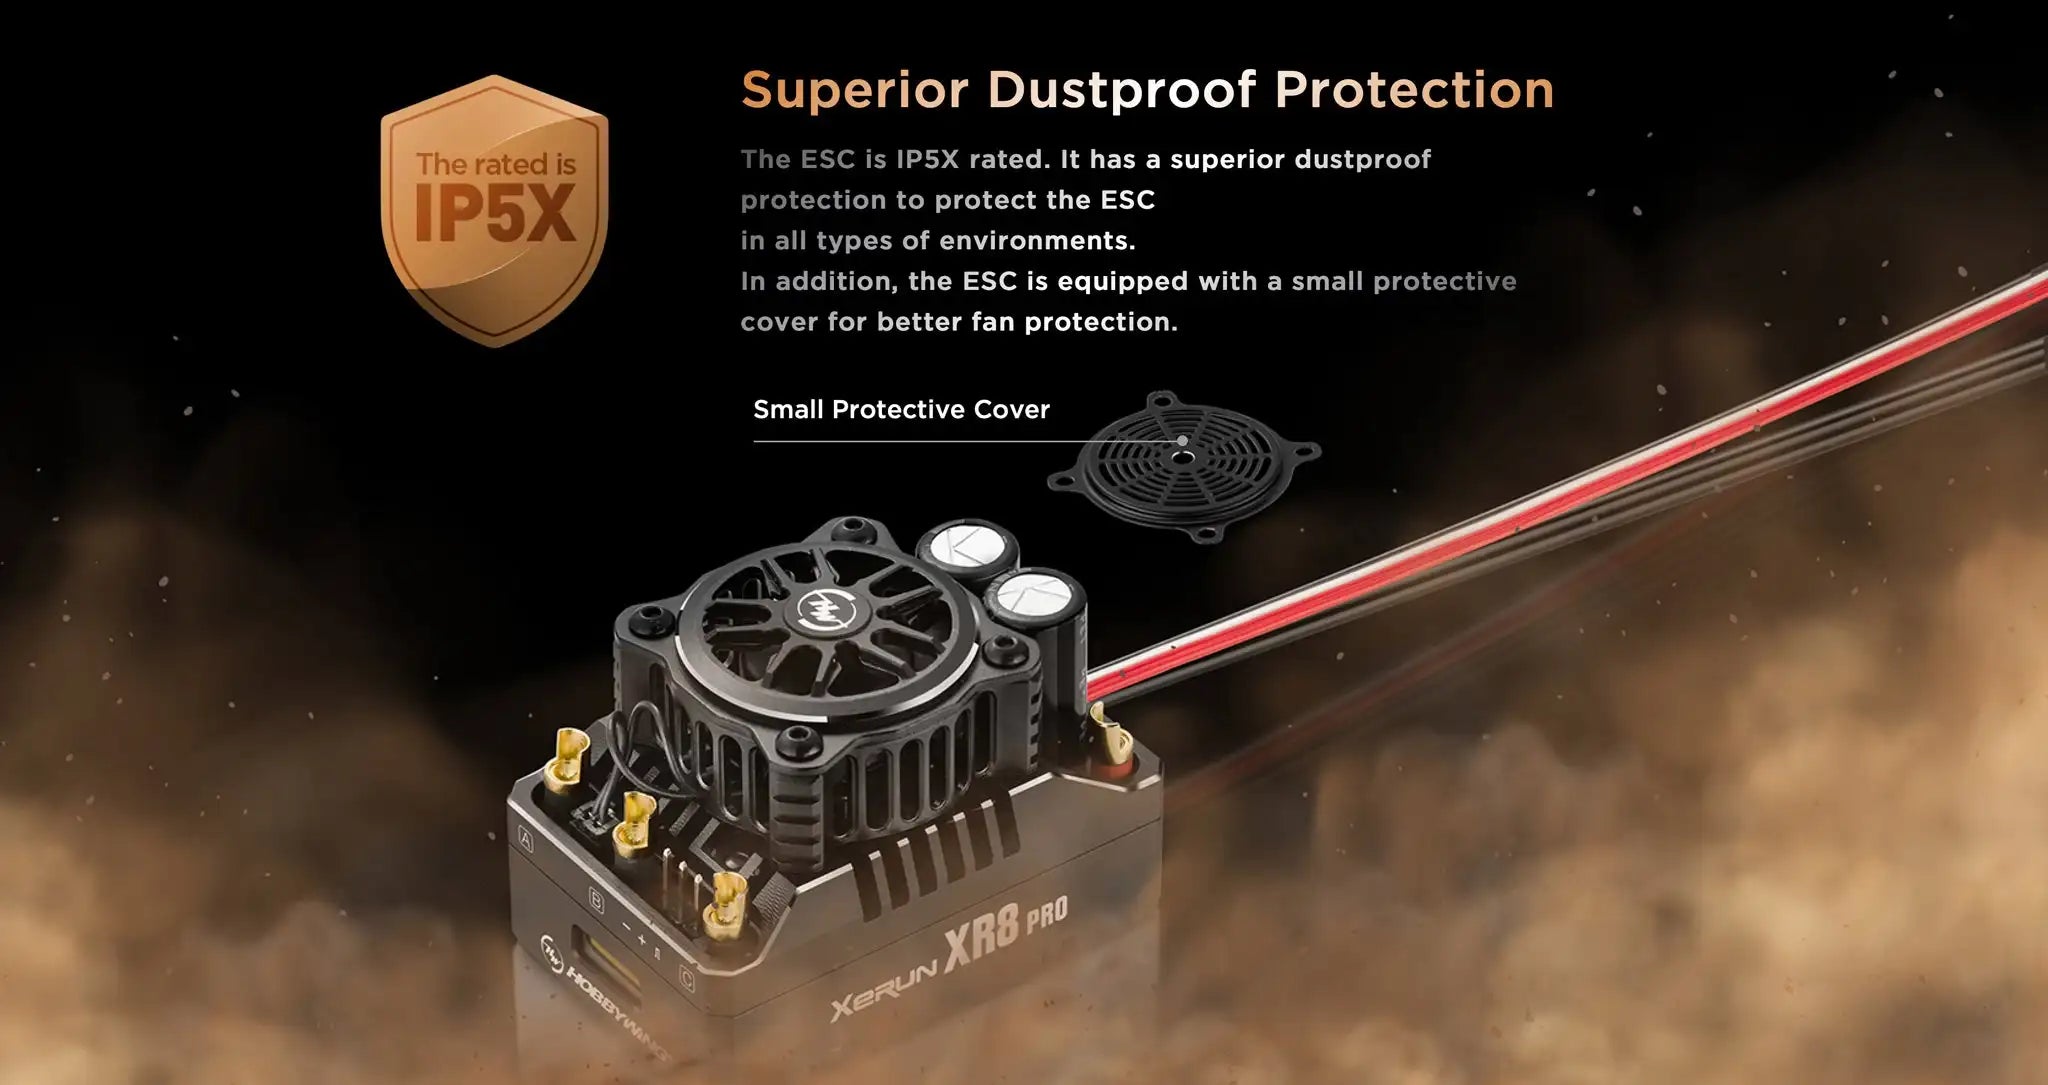 ESC has a superior dustproof IPSX protection to protect the ESC in all